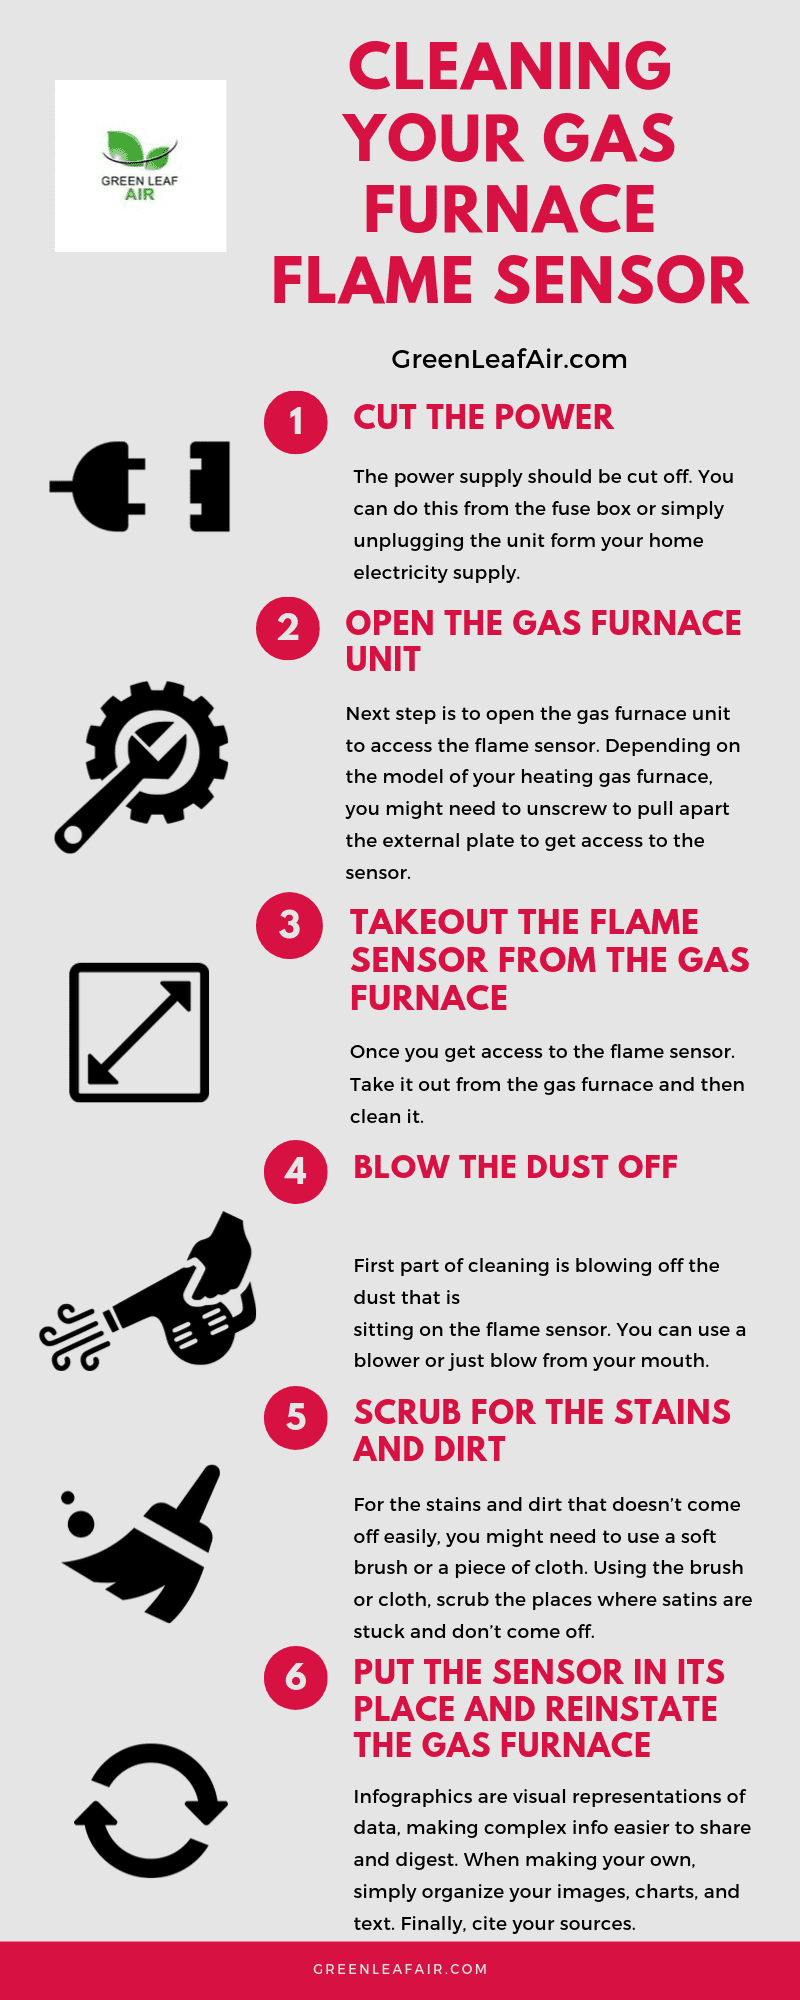 How To Clean Your Gas Furnace Flame Sensor